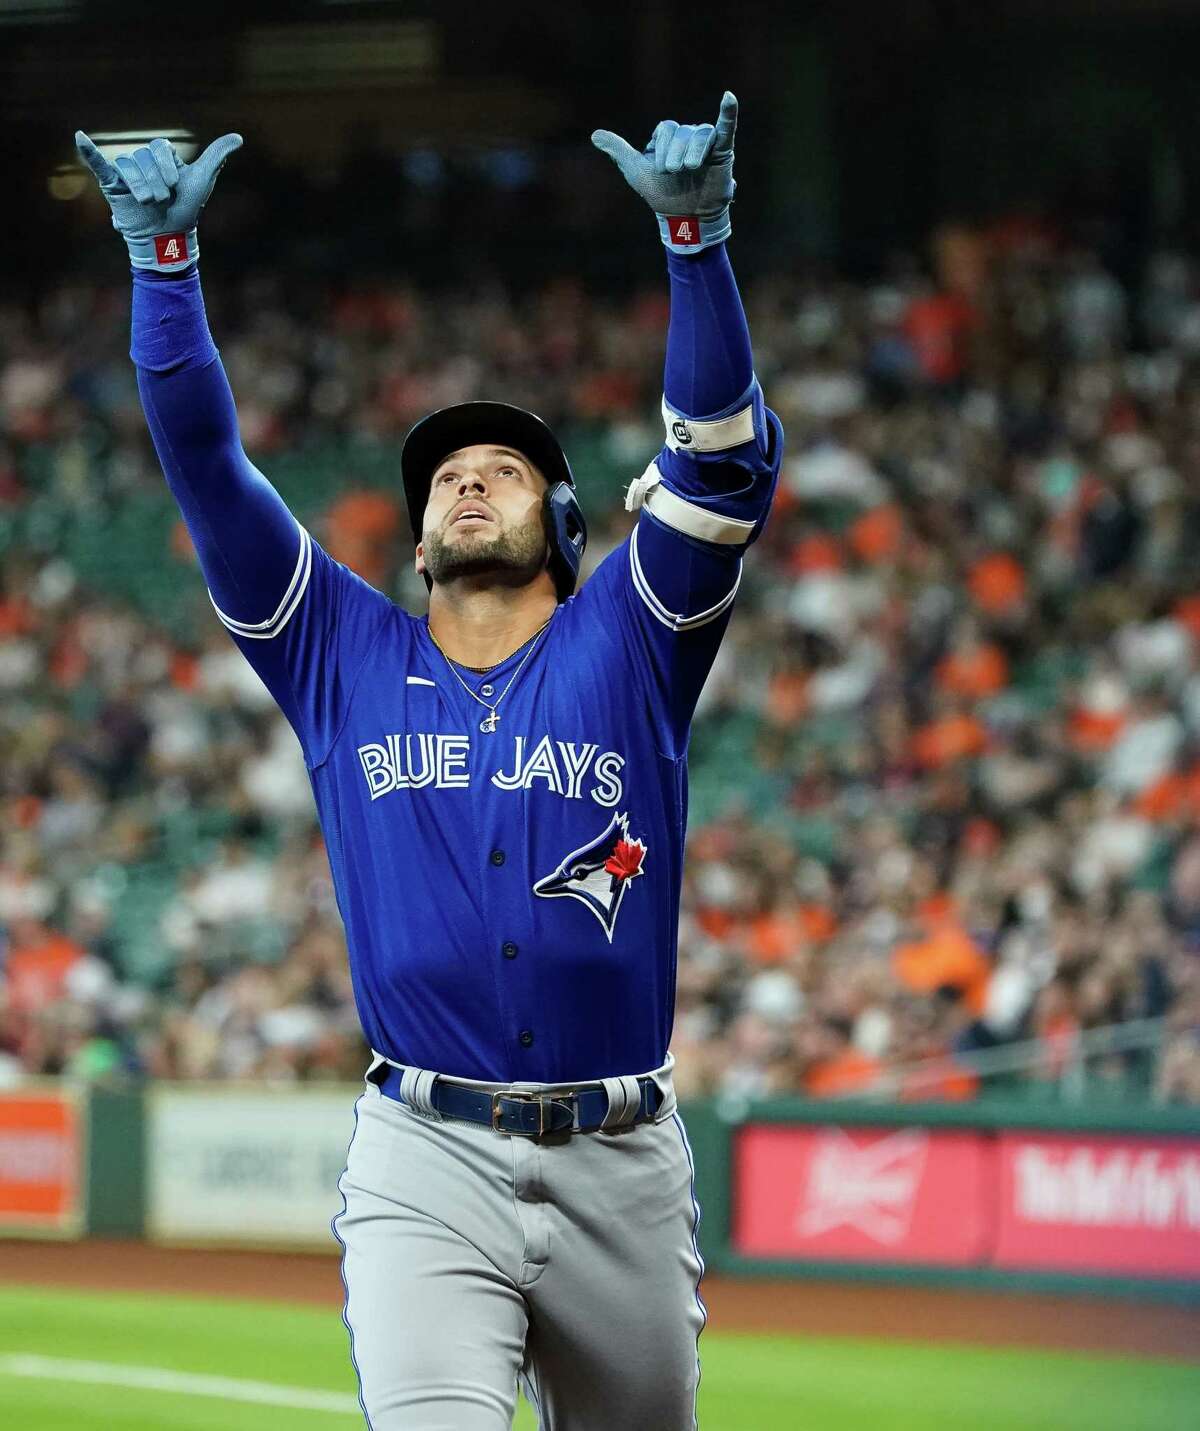 Toronto Blue Jays designated hitter George Springer (4) celebrates after hitting a solo home run against the Houston Astros during the first inning of an MLB game at Minute Maid Park on Saturday, April 23, 2022, in Houston.